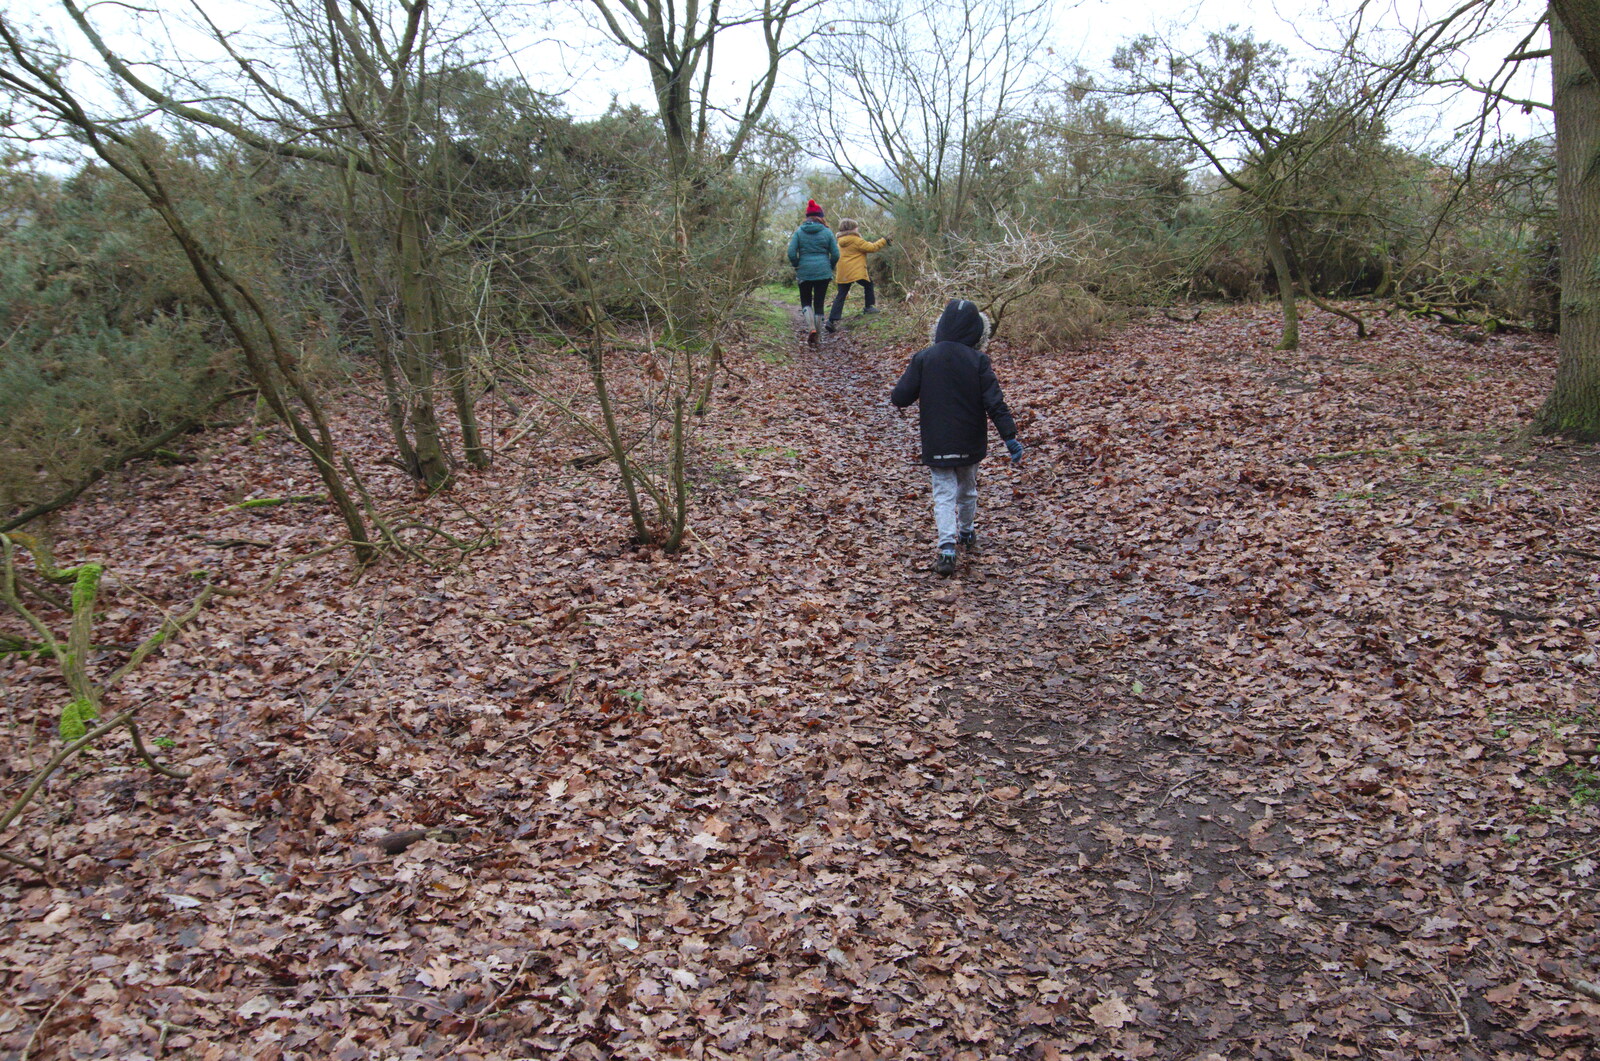 We stump off out of the woods from New Year's Day on the Ling, Wortham, Suffolk - 1st January 2020